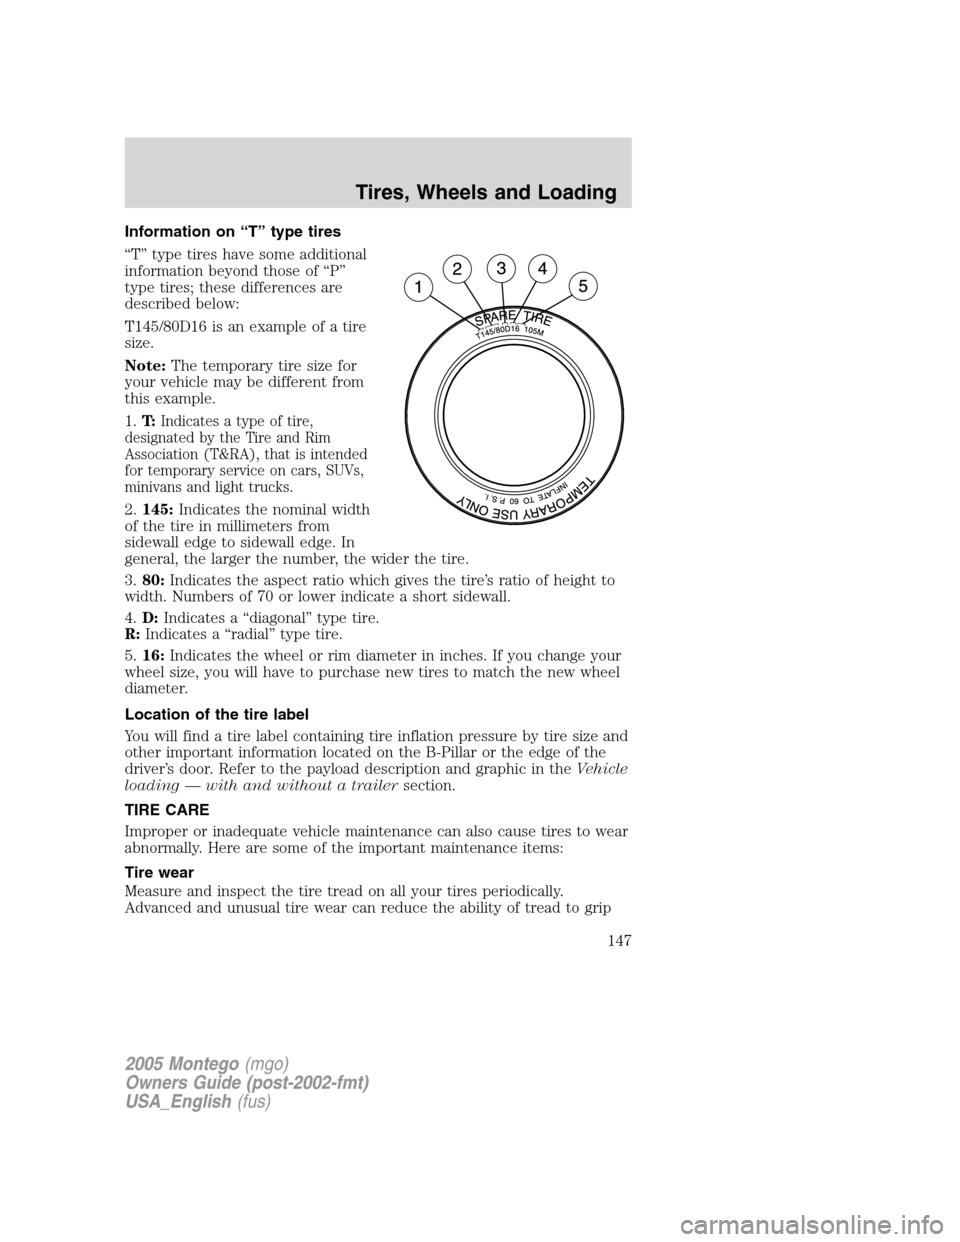 Mercury Montego 2005  Owners Manuals Information on “T” type tires
“T” type tires have some additional
information beyond those of “P”
type tires; these differences are
described below:
T145/80D16 is an example of a tire
size